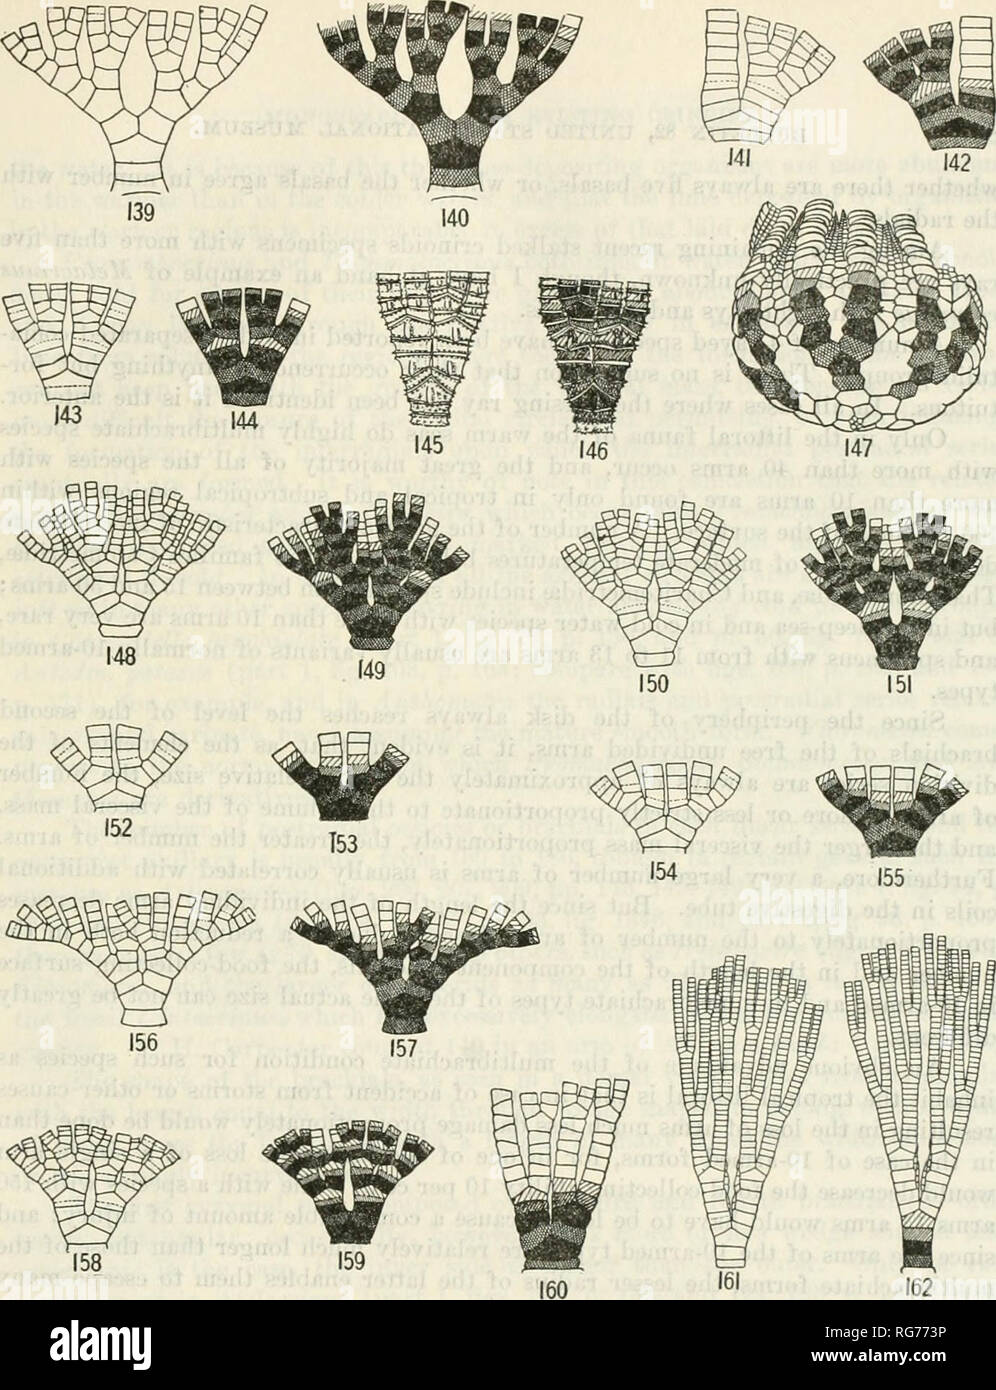 . Bulletin - United States National Museum. Science. Figs. 139-162.—PboximaIj Pobtion of Post-Radial Series of various Comatulids. 139. Radial, DIVISION series and ARM BASES OF PONTIOMETBA ANDBRSONI. 140. SAME, WITH HOMOLOGIES OP OSSICLES INDICATED. 141. DIVISION SEKIBS AND PROXIMAL BRACHIALS OF CRASPEDOMETRA .iCUTI- ciRRA. 142. Same, with homologies of ossicles indicated. 143. Division series and asm BASES OF Ztgometea comata. 144. Same, with homologies op ossicles indicated. 145. Radial, DIVISIO.V SERIE.S AND PROXIMAL BRACHIALS OF OCEANOMEXRA GIG.VNTEA. 146. Sa.ME, WITH HOMOLOGIES OF OSSICLE Stock Photo